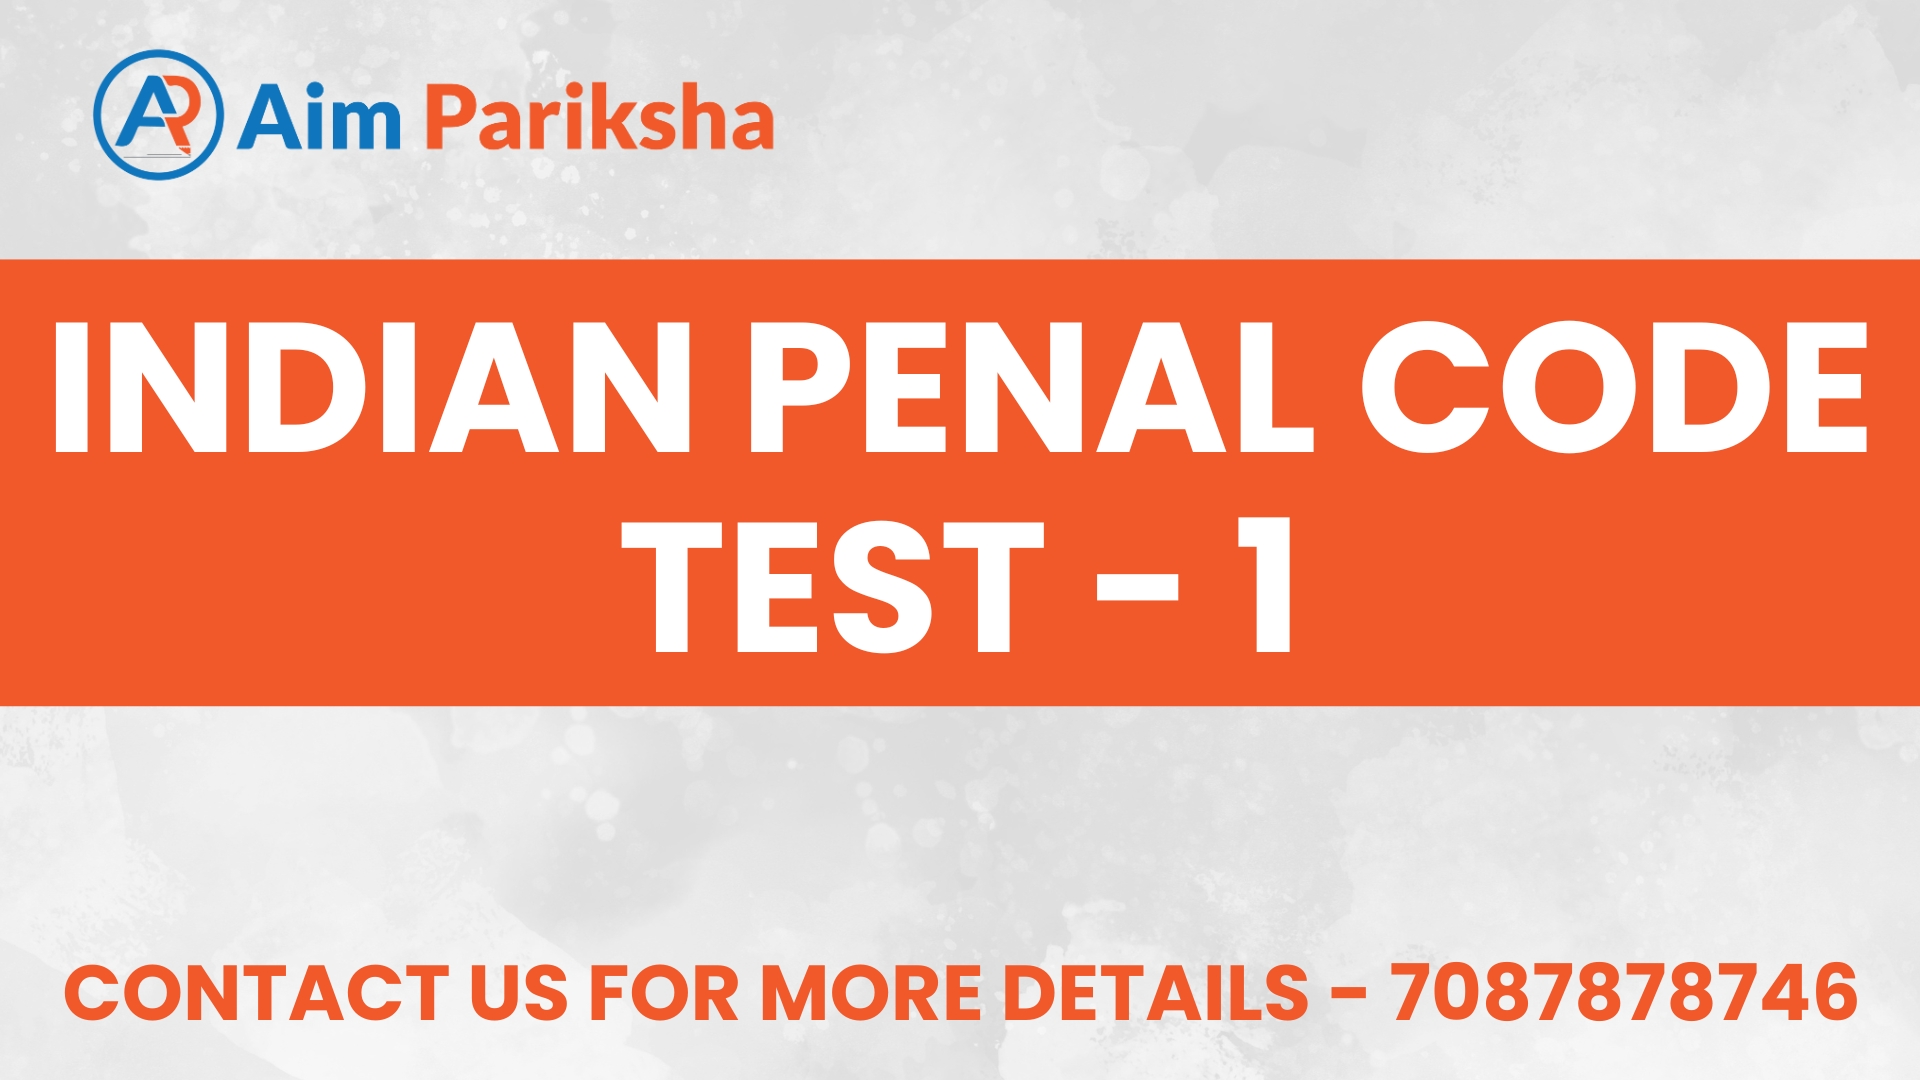 Indian Penal Code Test - 1